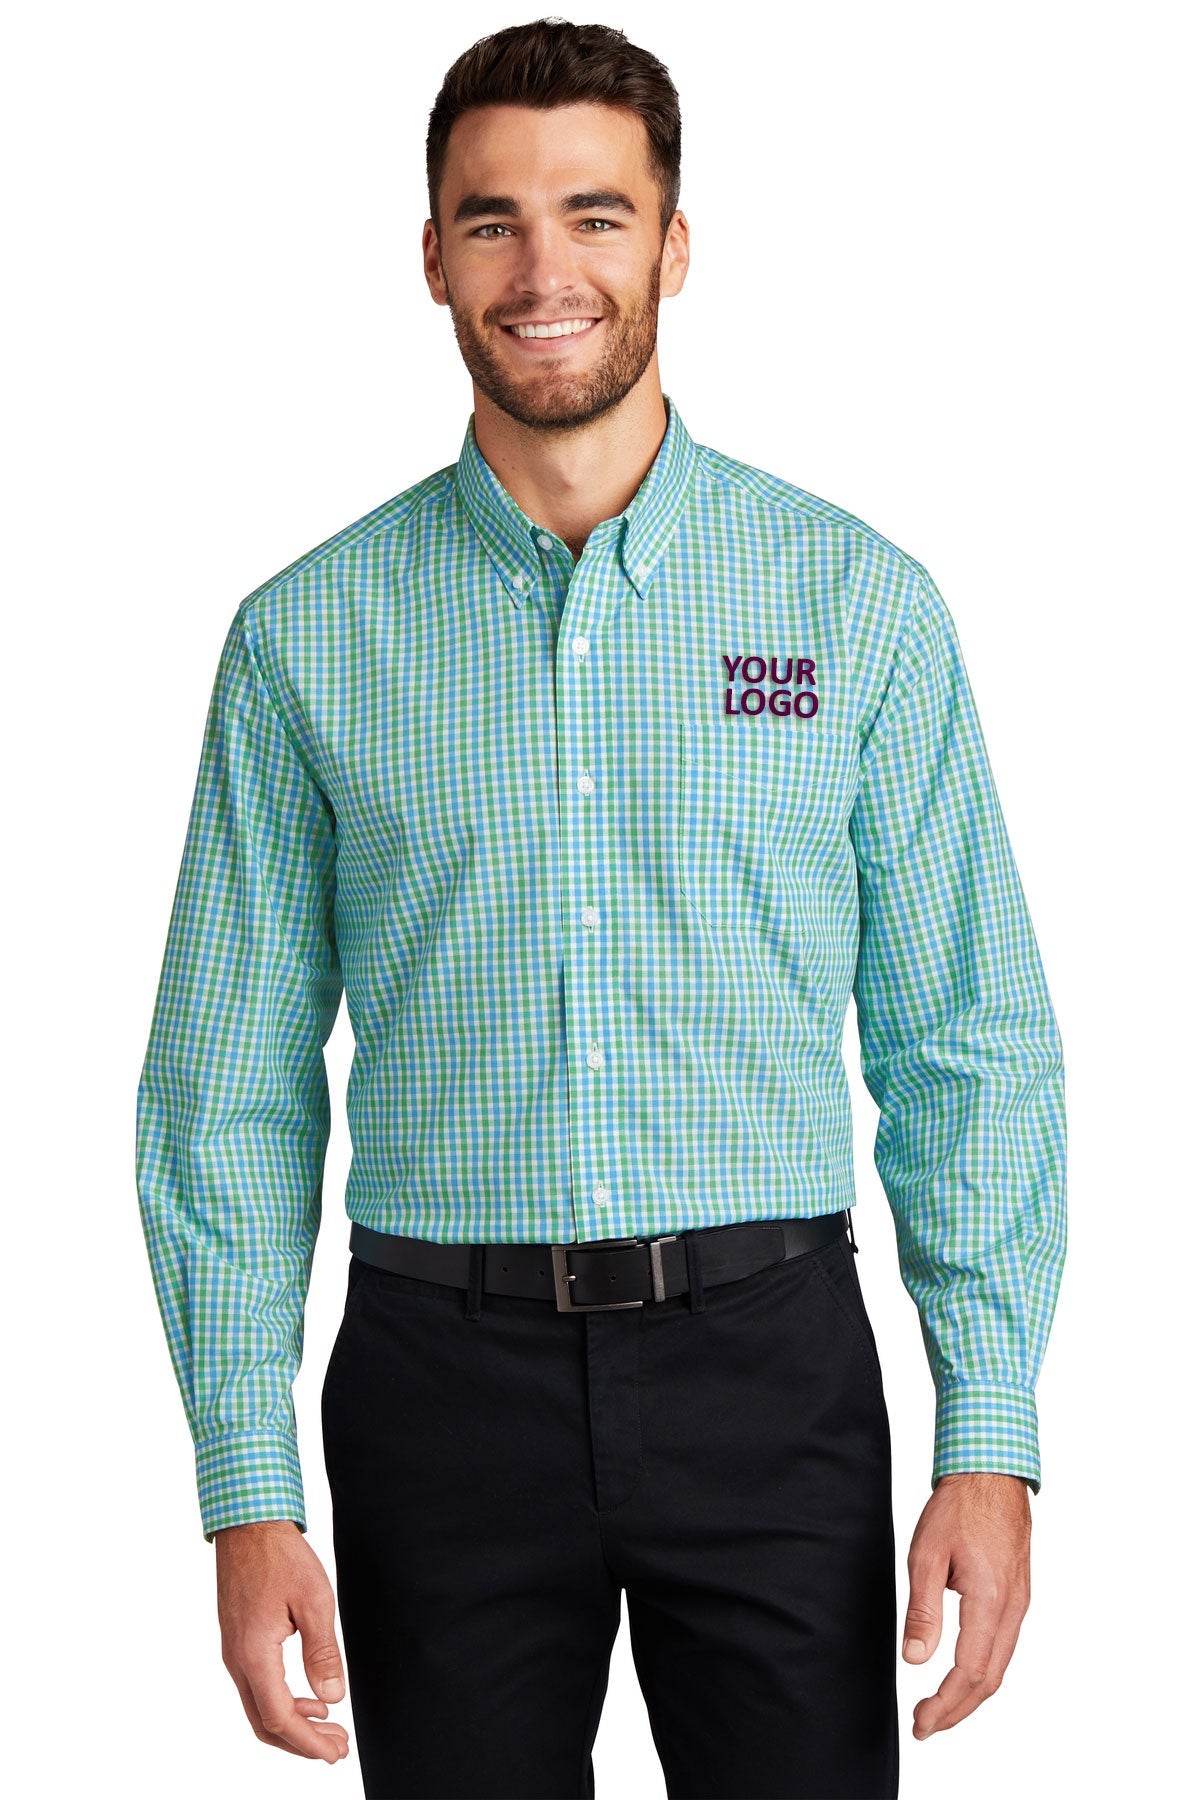 Port Authority Green/ Aqua S654 order embroidered polo shirts